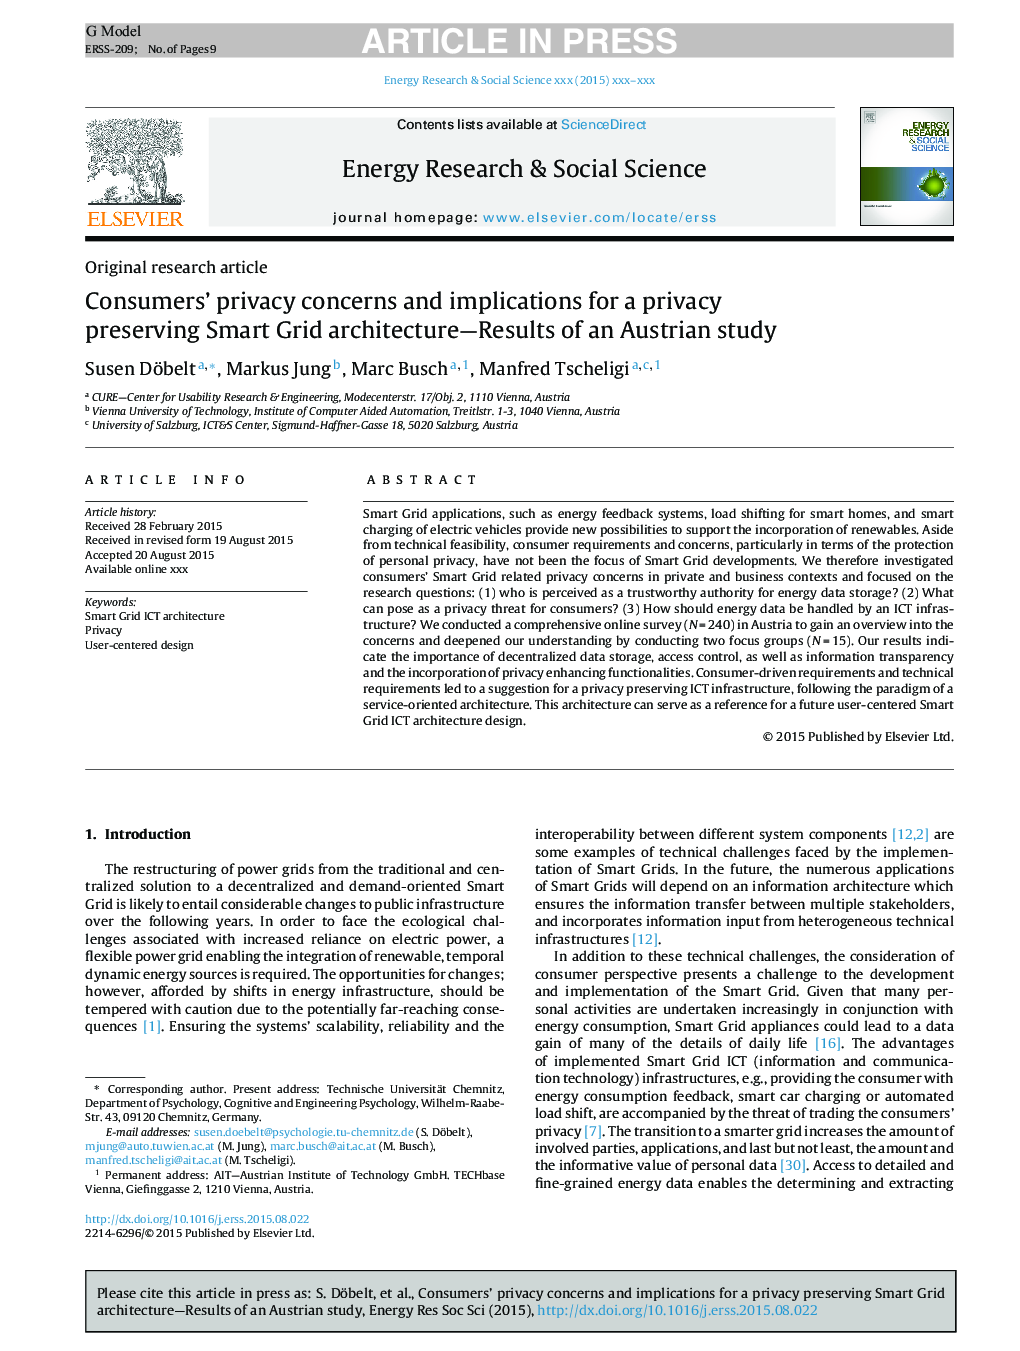 Consumers' privacy concerns and implications for a privacy preserving Smart Grid architecture-Results of an Austrian study